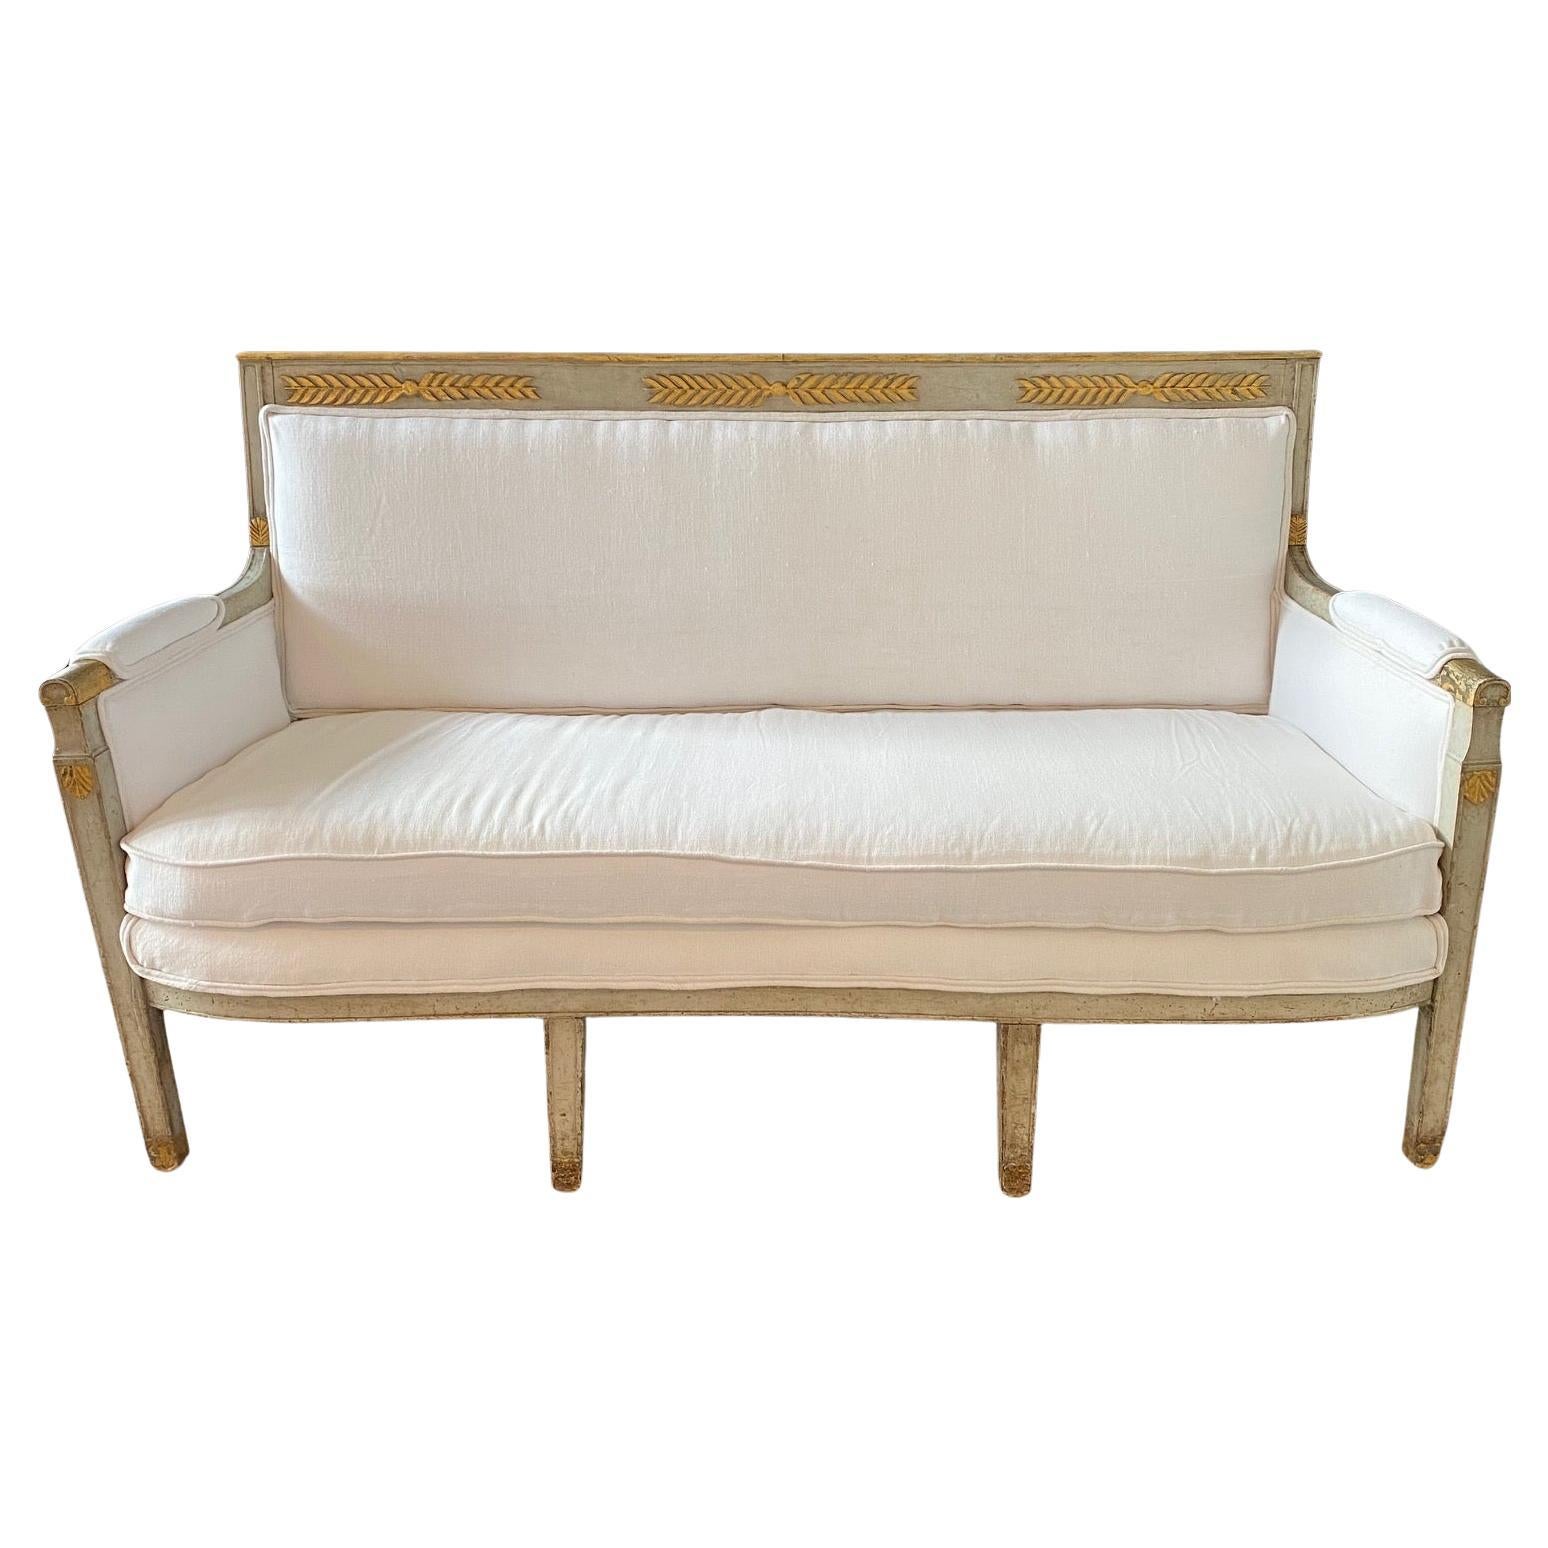 Early 19th Century Italian Neoclassical Painted and Parcel Gilt Sofa or Canape